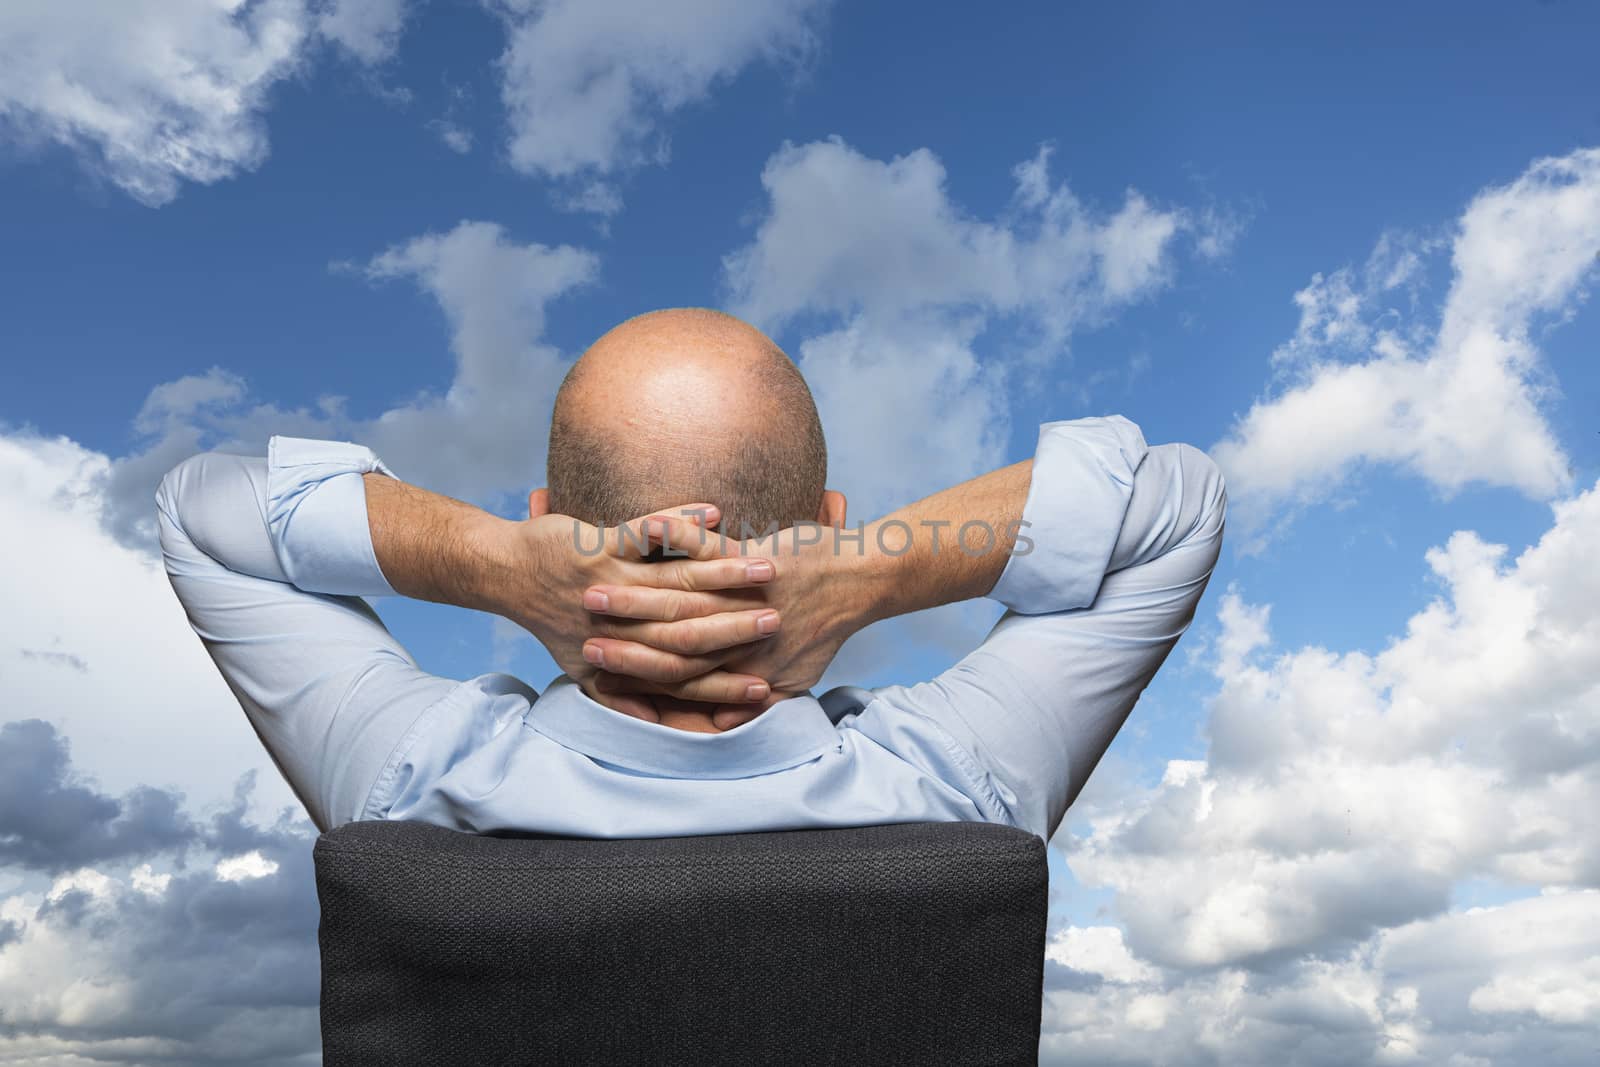 a relaxed man shot from behind in front of a cloudy sky